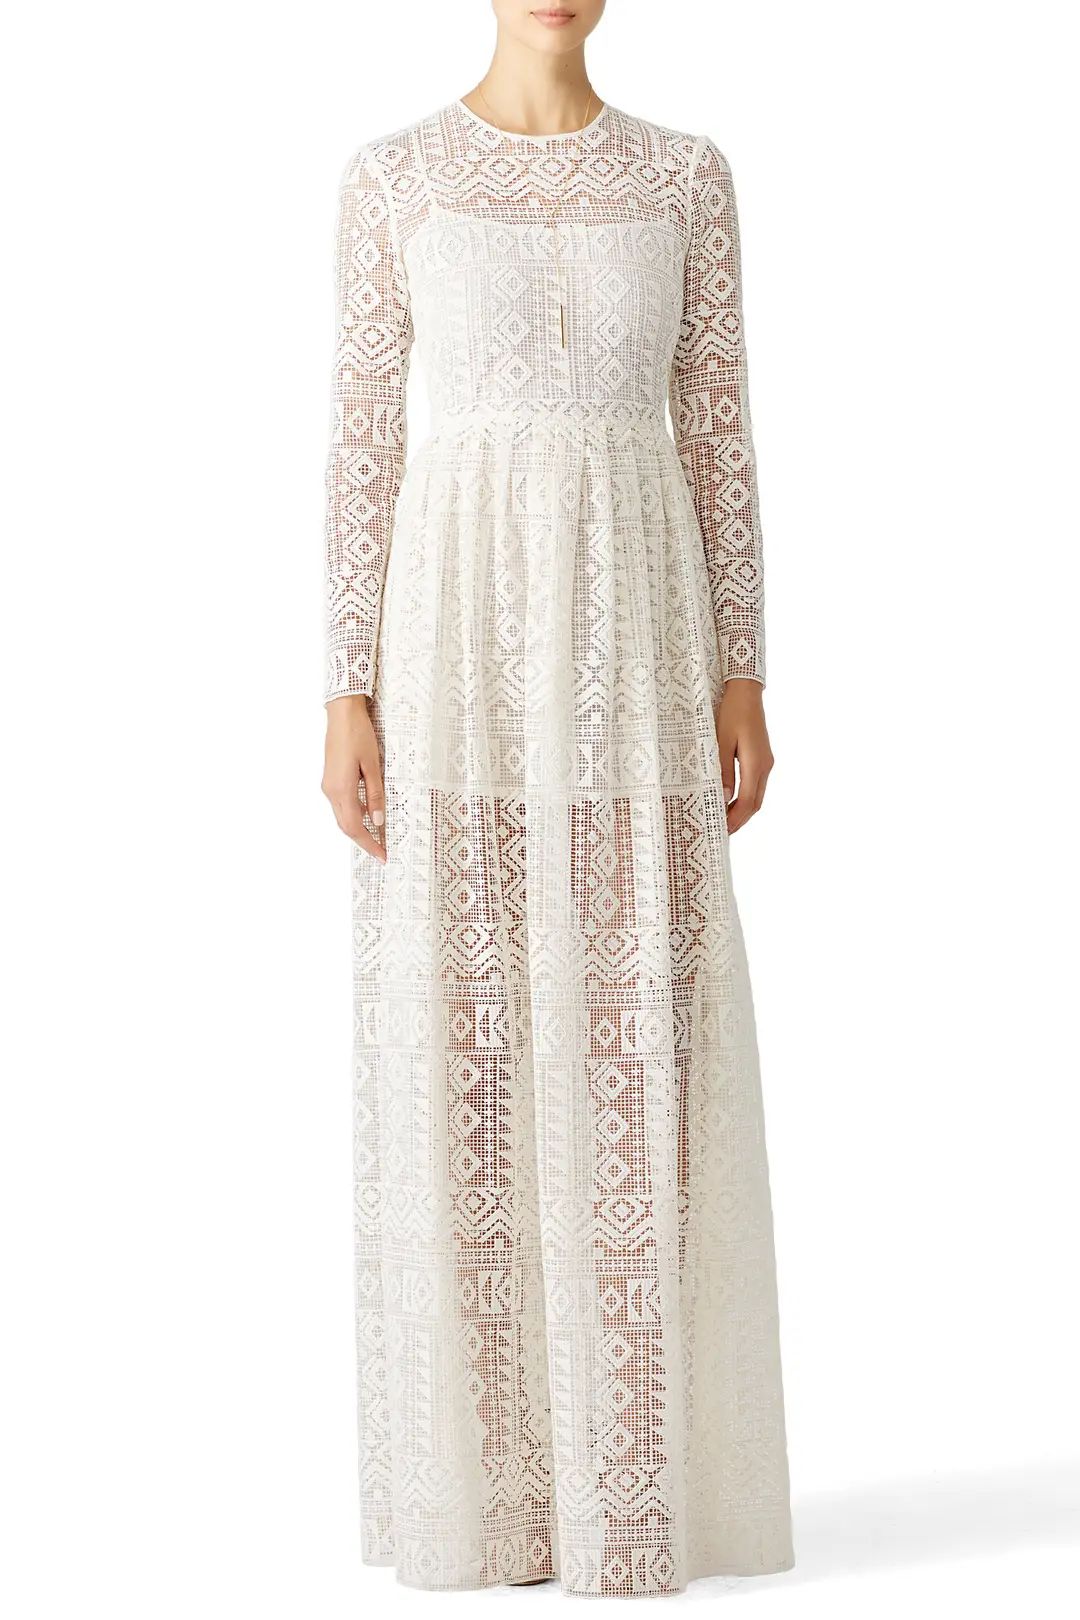 Philosophy di Lorenzo Serafini White Angelic Lace Gown | Rent the Runway